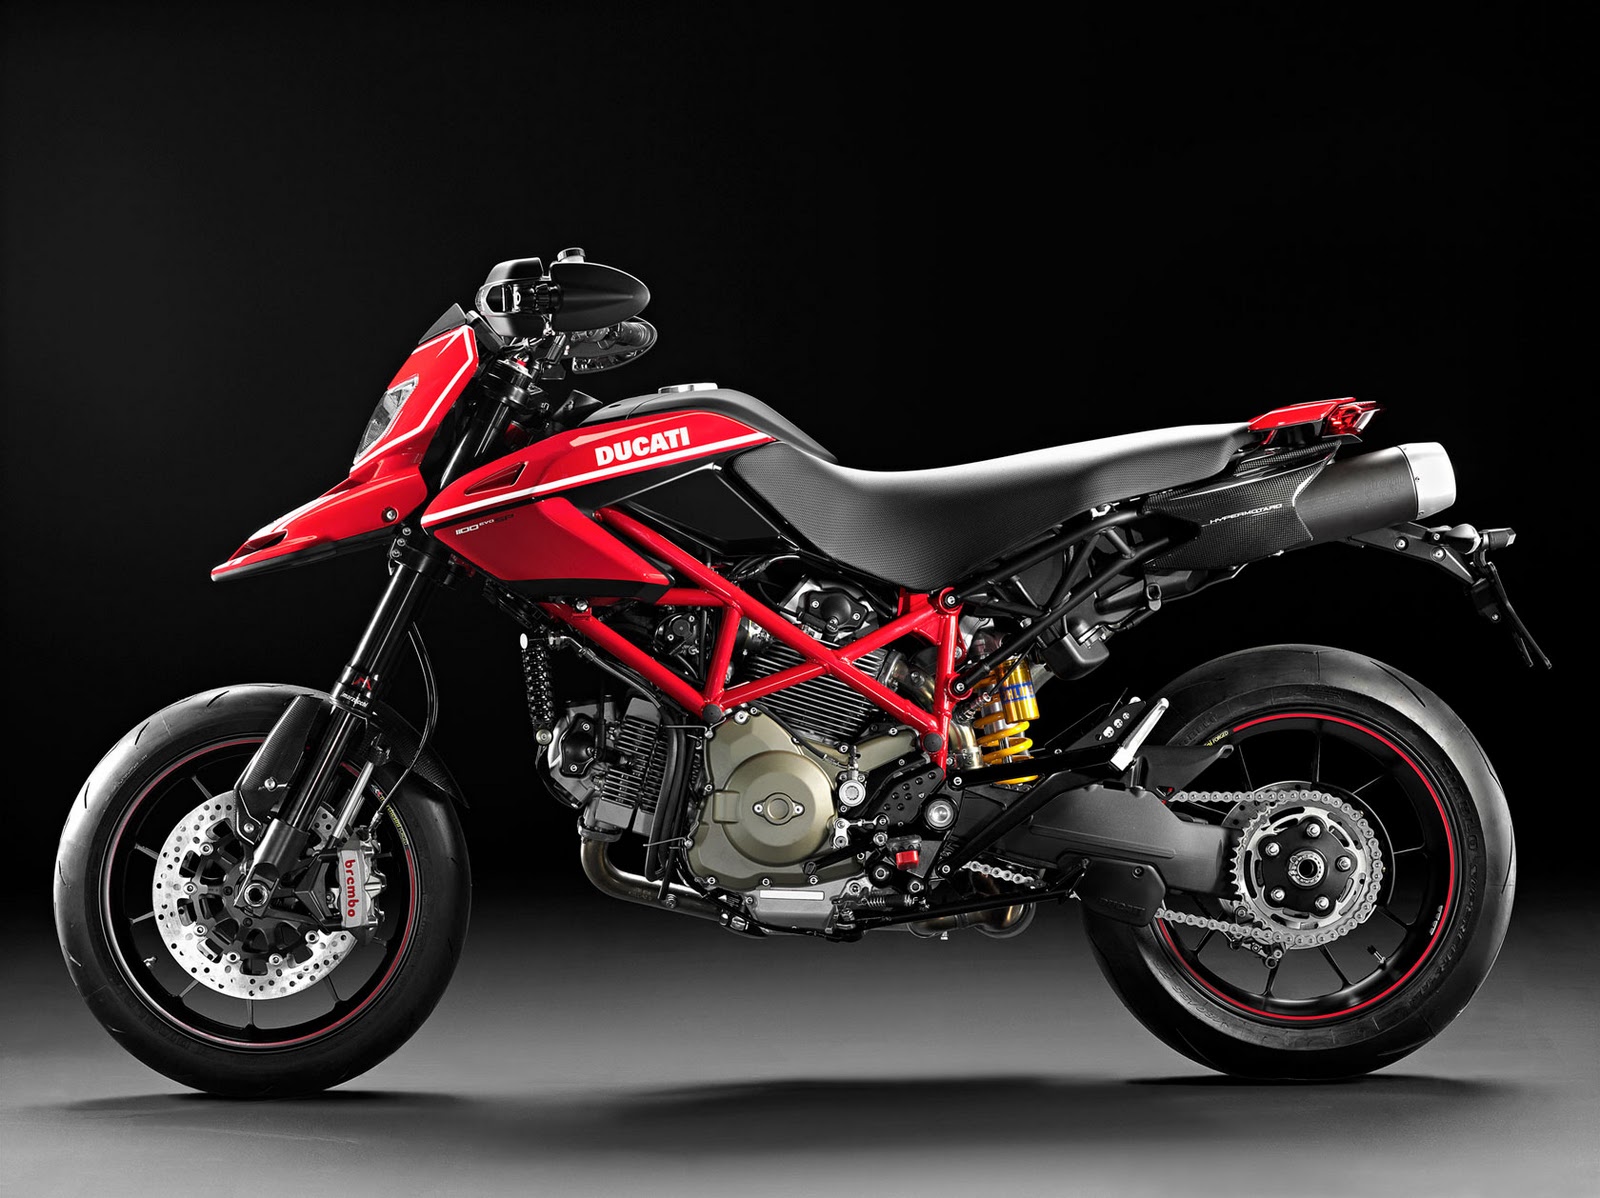 Ducati Motorcycle Pictures: Ducati Hypermotard 1100 EVO SP - 2011